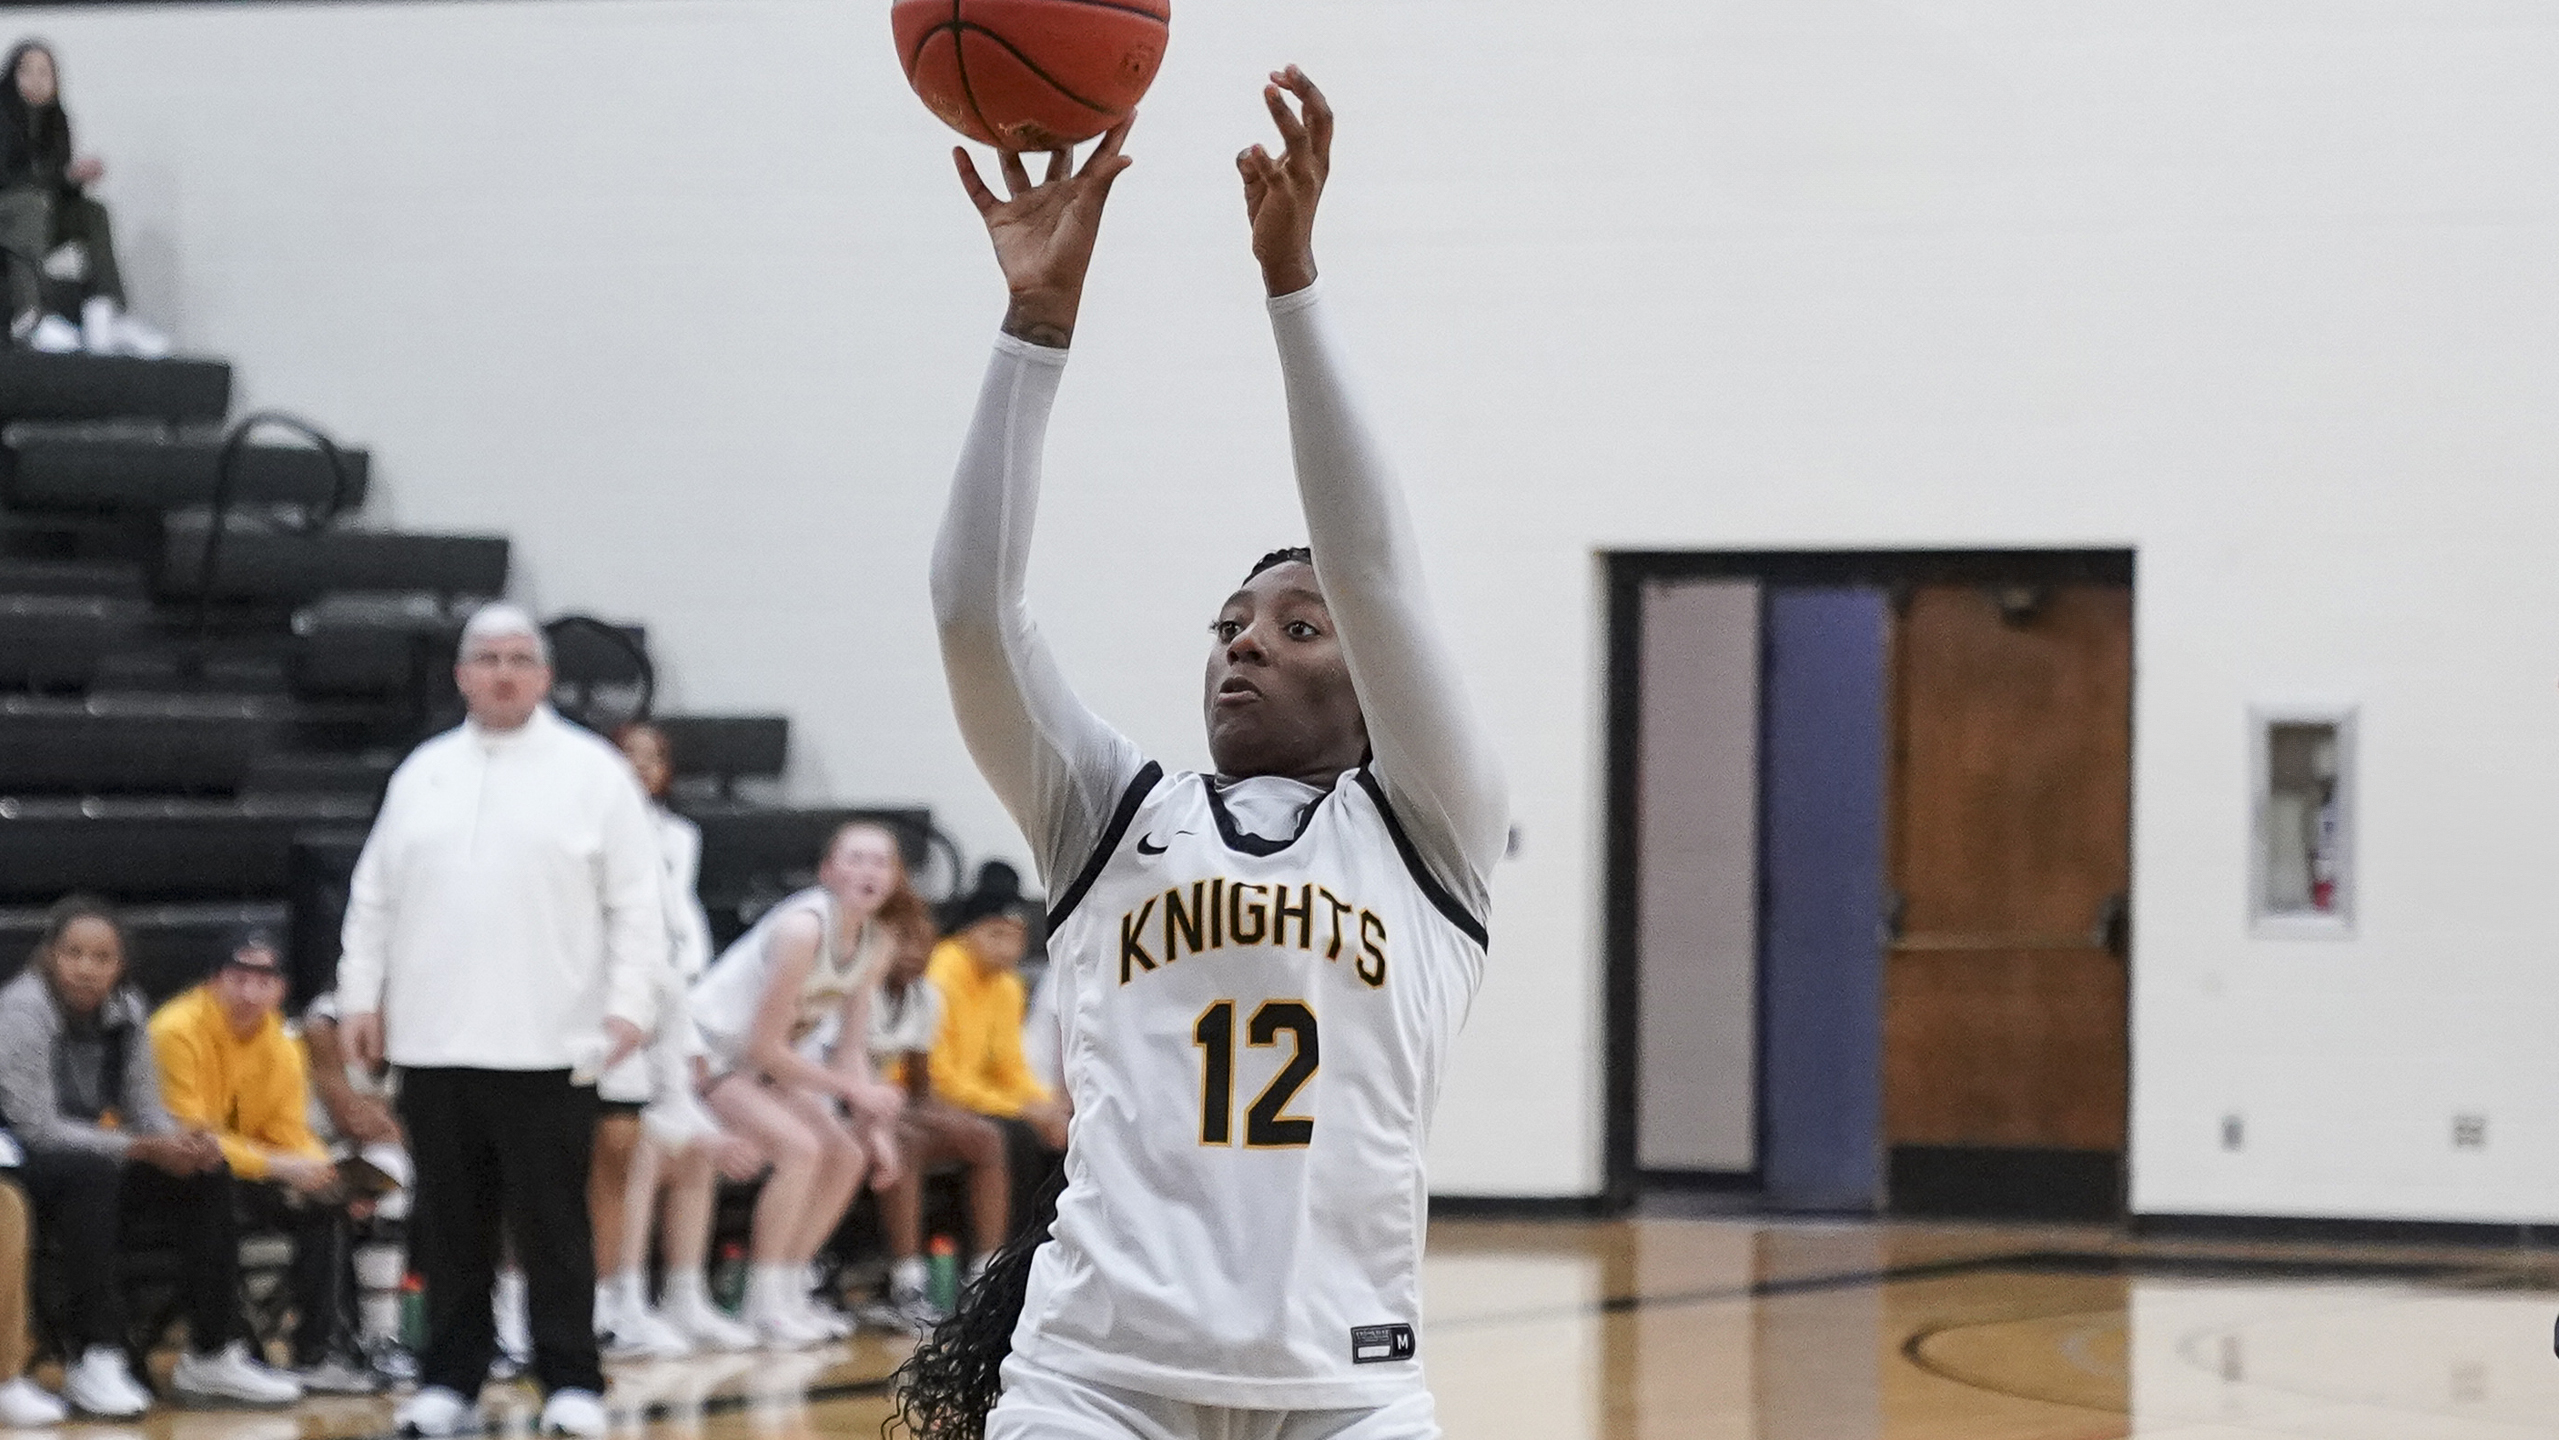 Knights win streak snapped in loss to Cougars